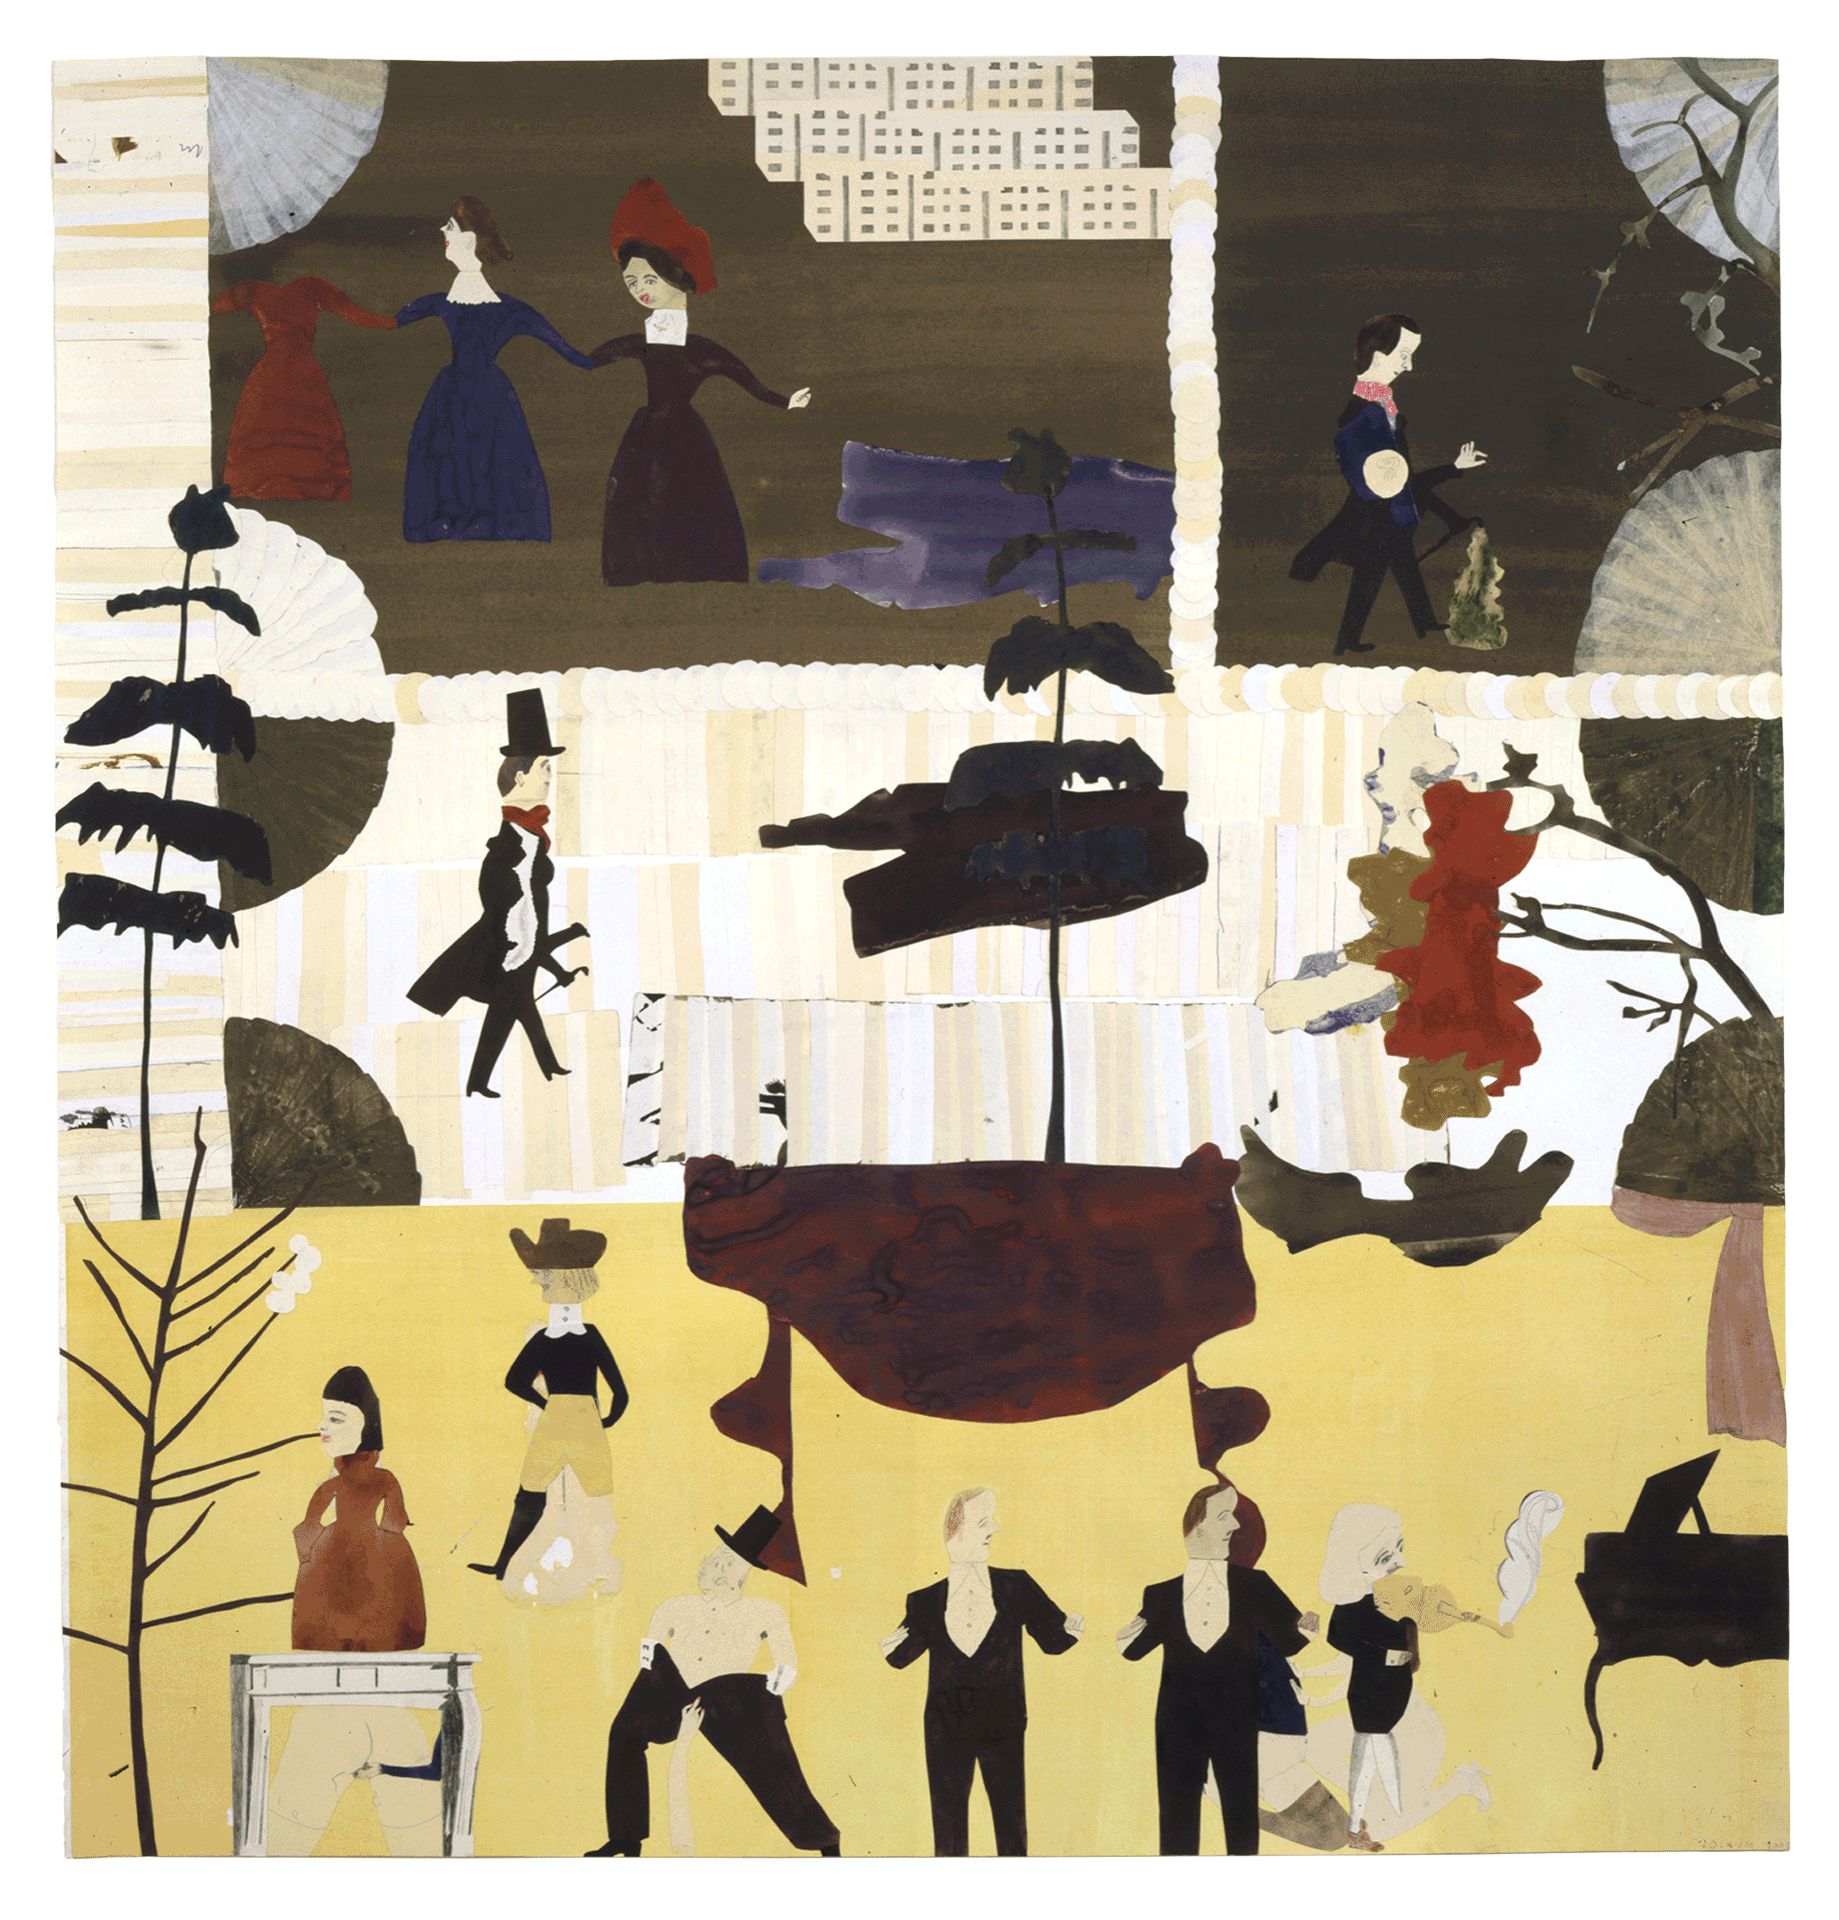 A work on paper by Jockum Nordstr√∂m, titled Burghers, Duties and Favours, dated 2002